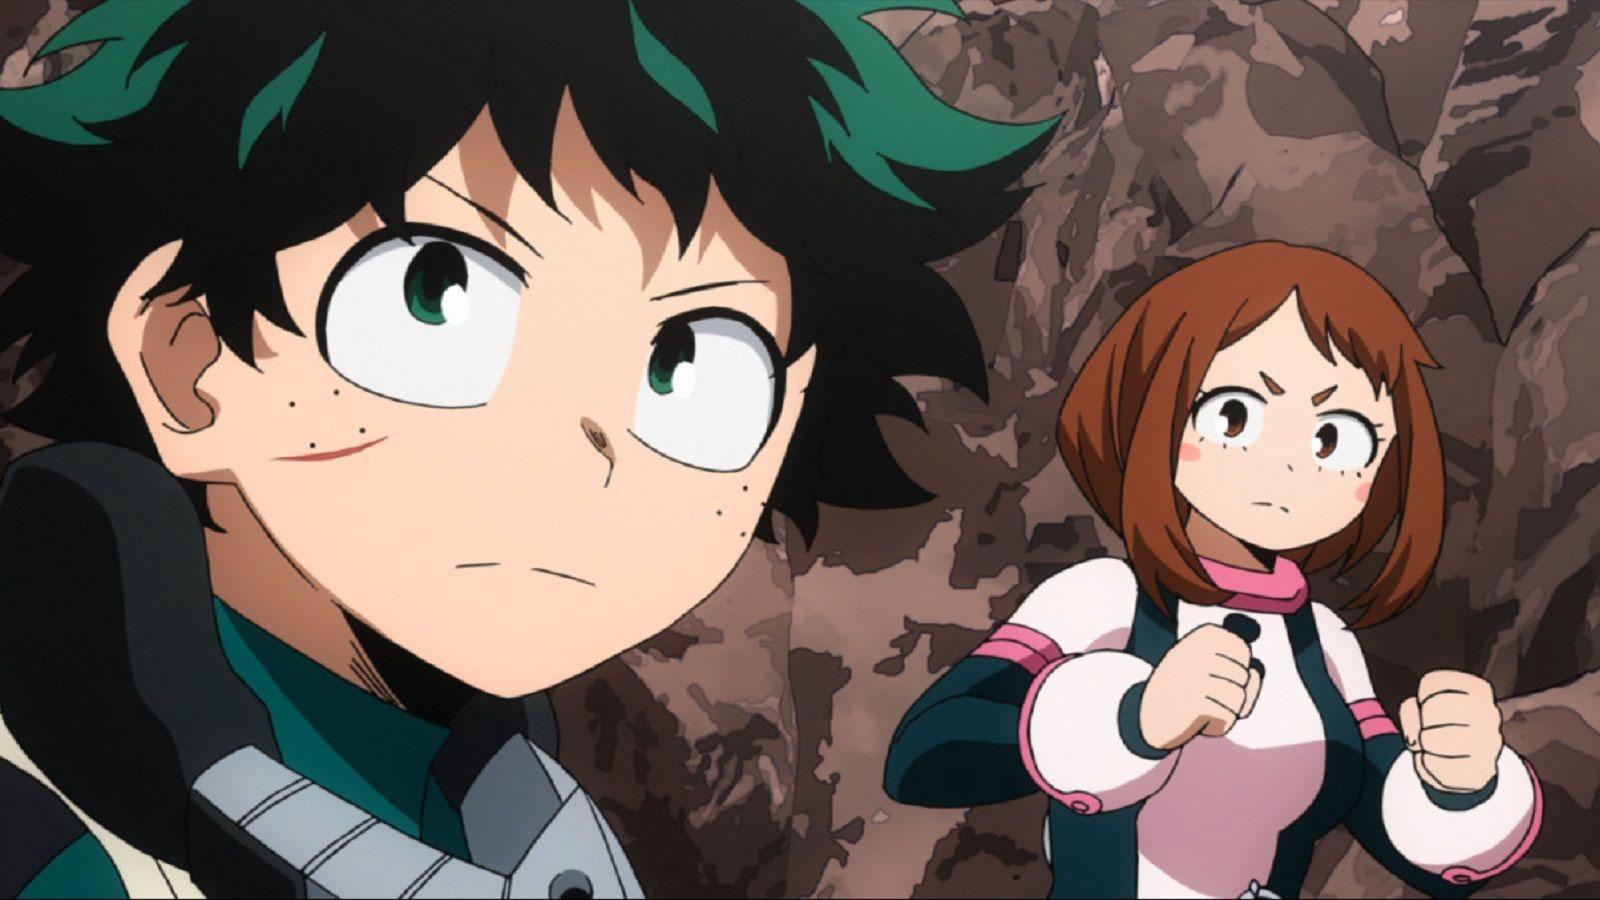 My Hero Academia Season 6 Episode 14 may return with a new arc in January